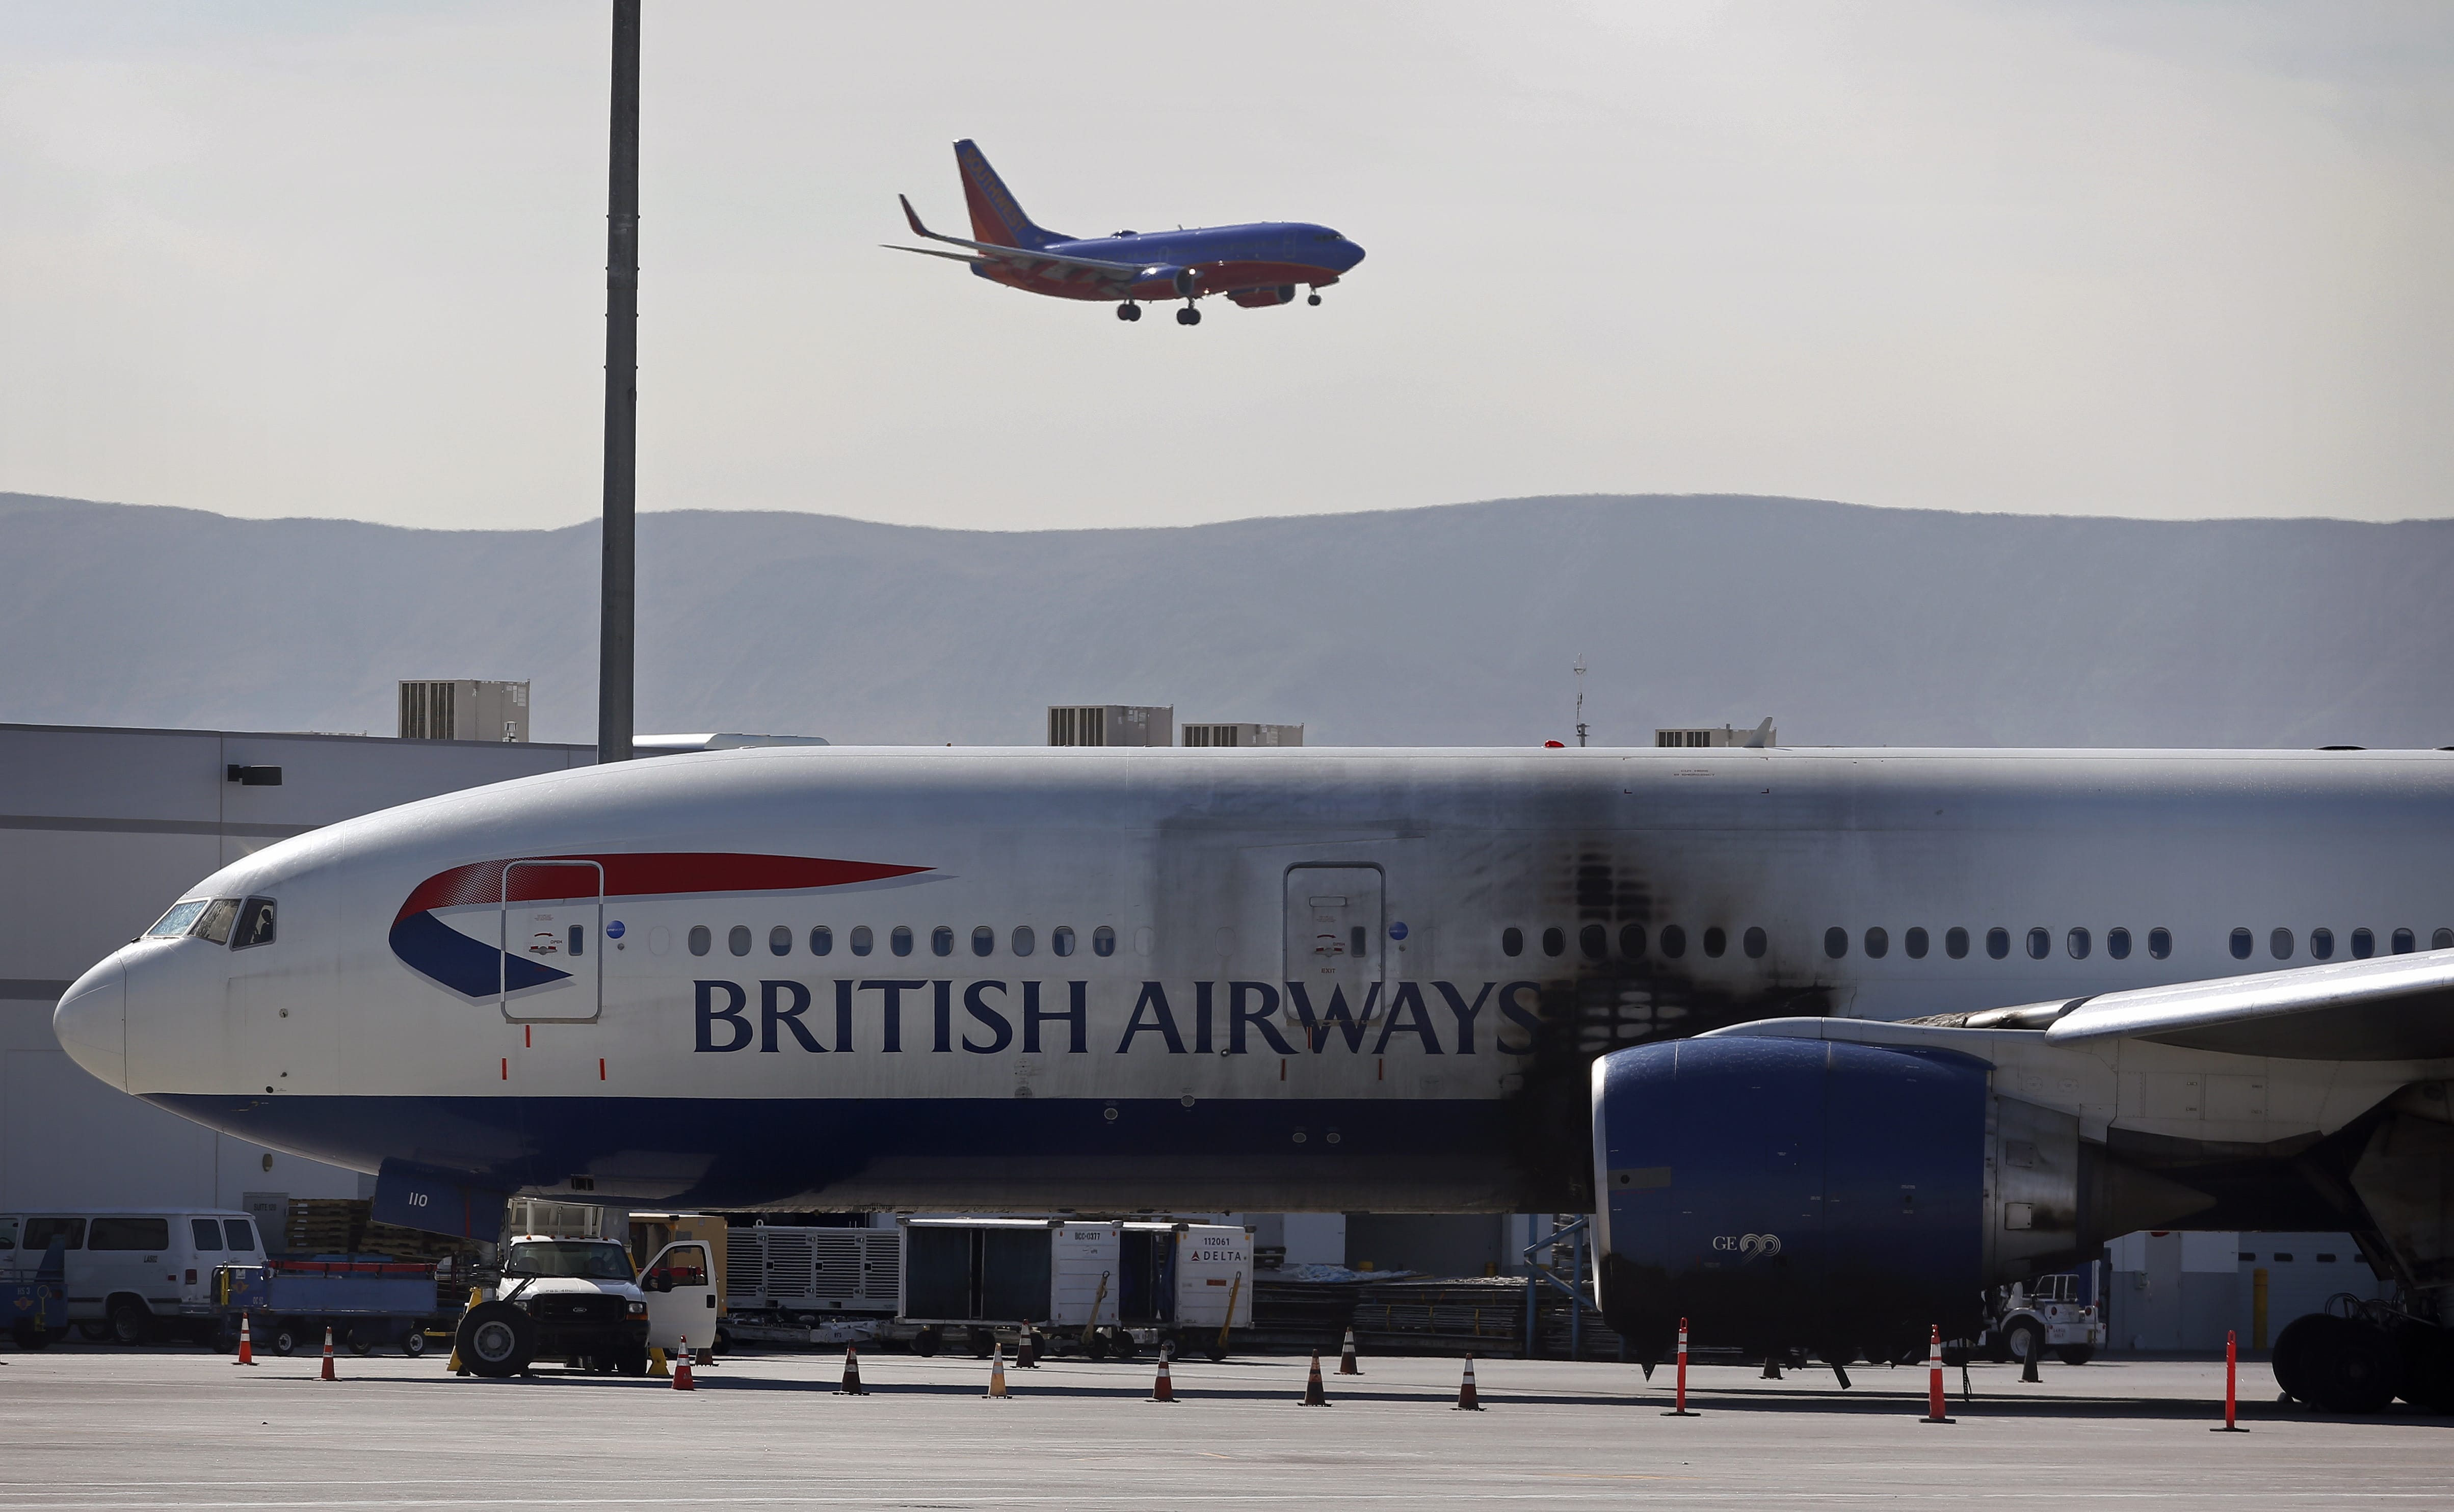 A damaged British Airways Boeing 777-200 sits at McCarran International Airport Wednesday, Sept. 9, 2015, in Las Vegas. An engine caught fire before takeoff Tuesday forcing the evacuation of the crew and passengers.